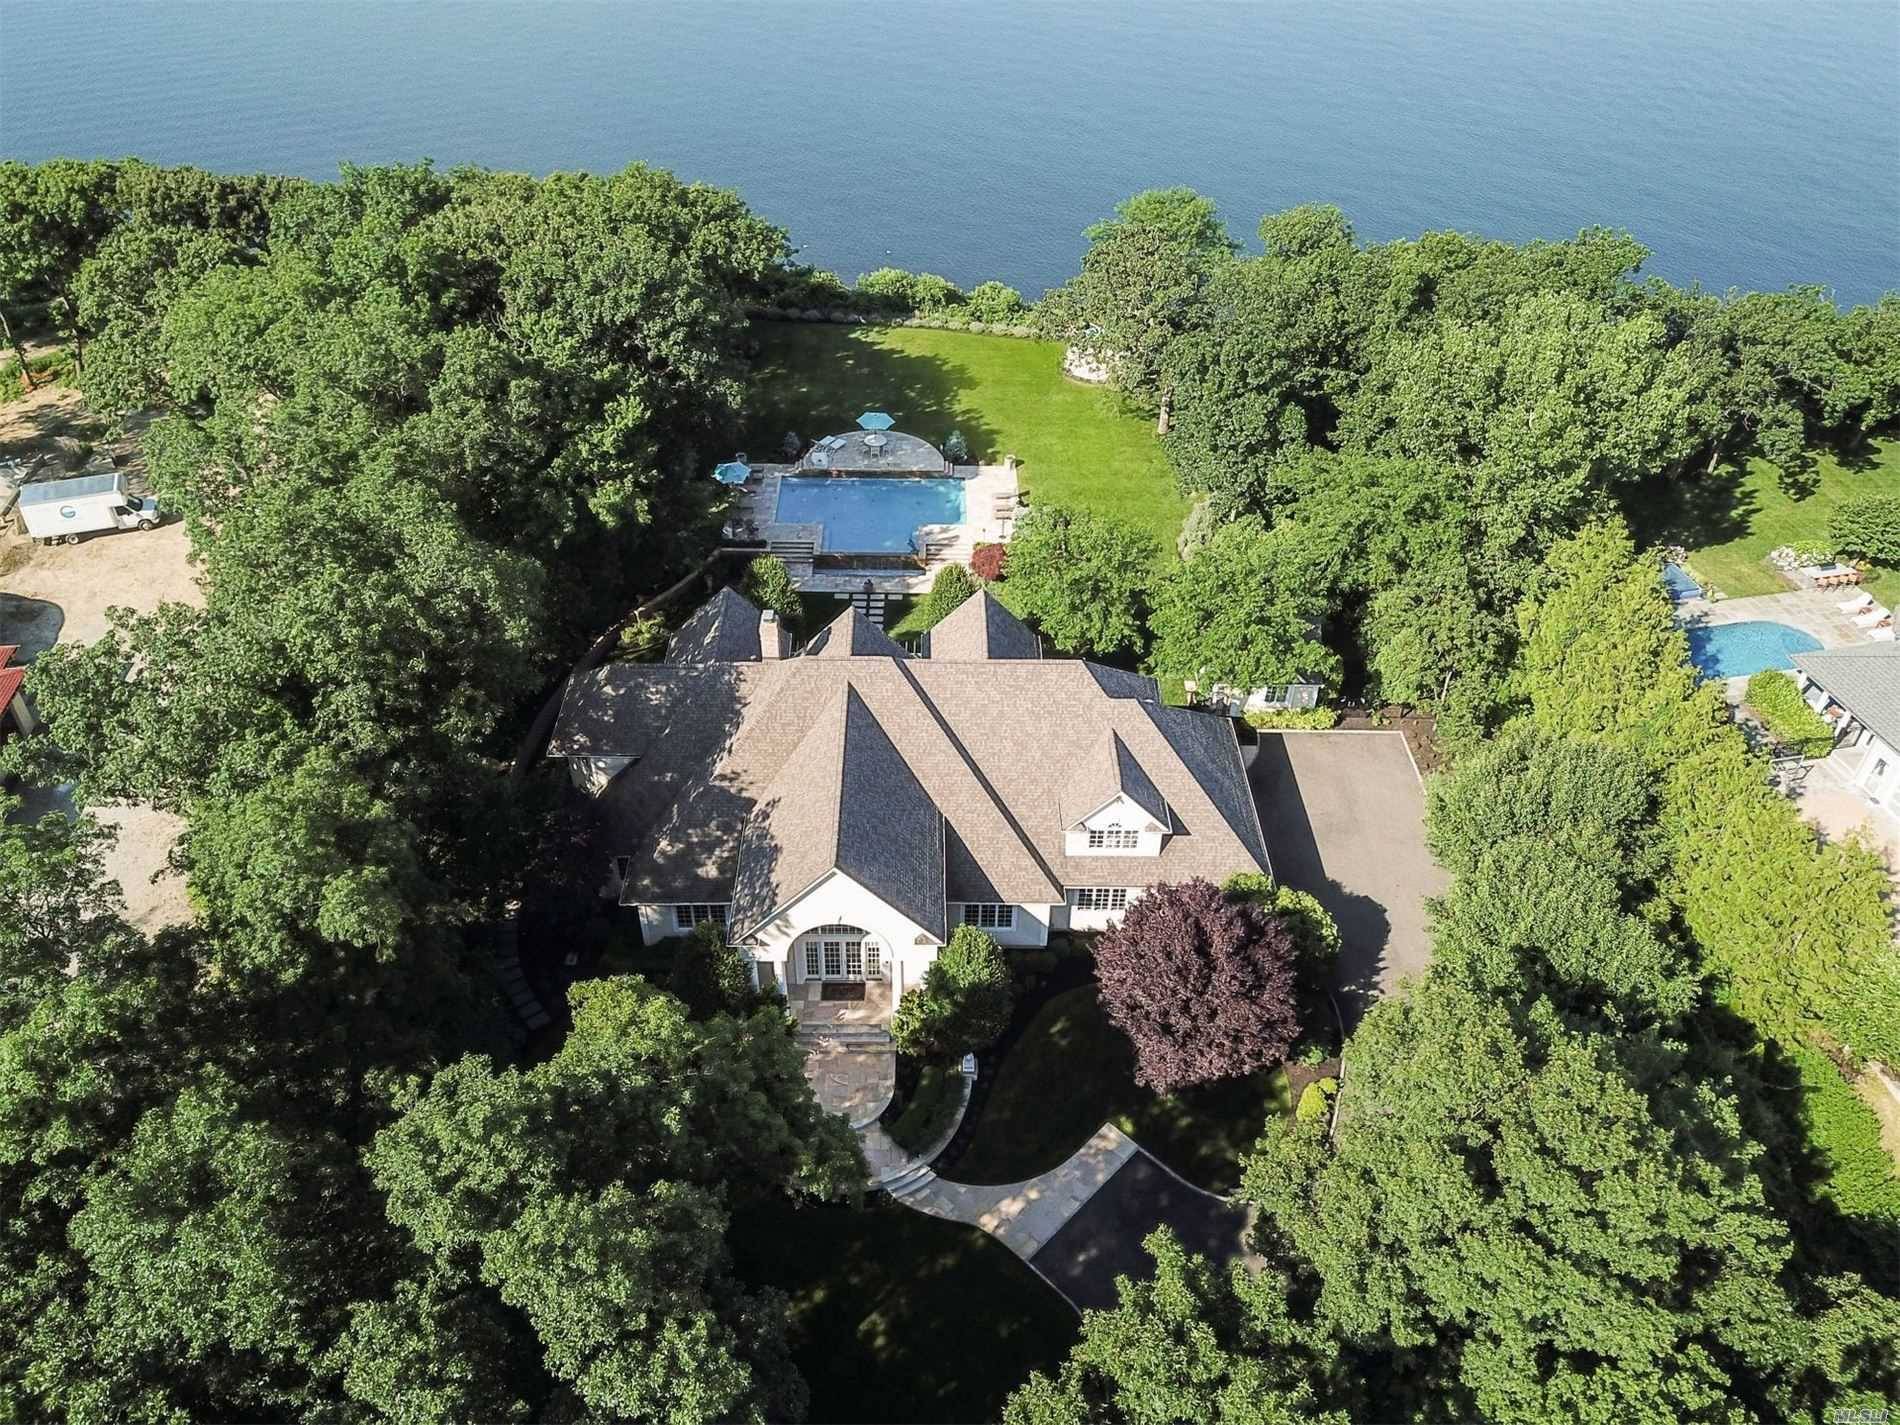 Magnificent Waterfront Estate With Spectacular Unobstructed Panoramic Views Of The Long Island Sound Smithtown Bay.